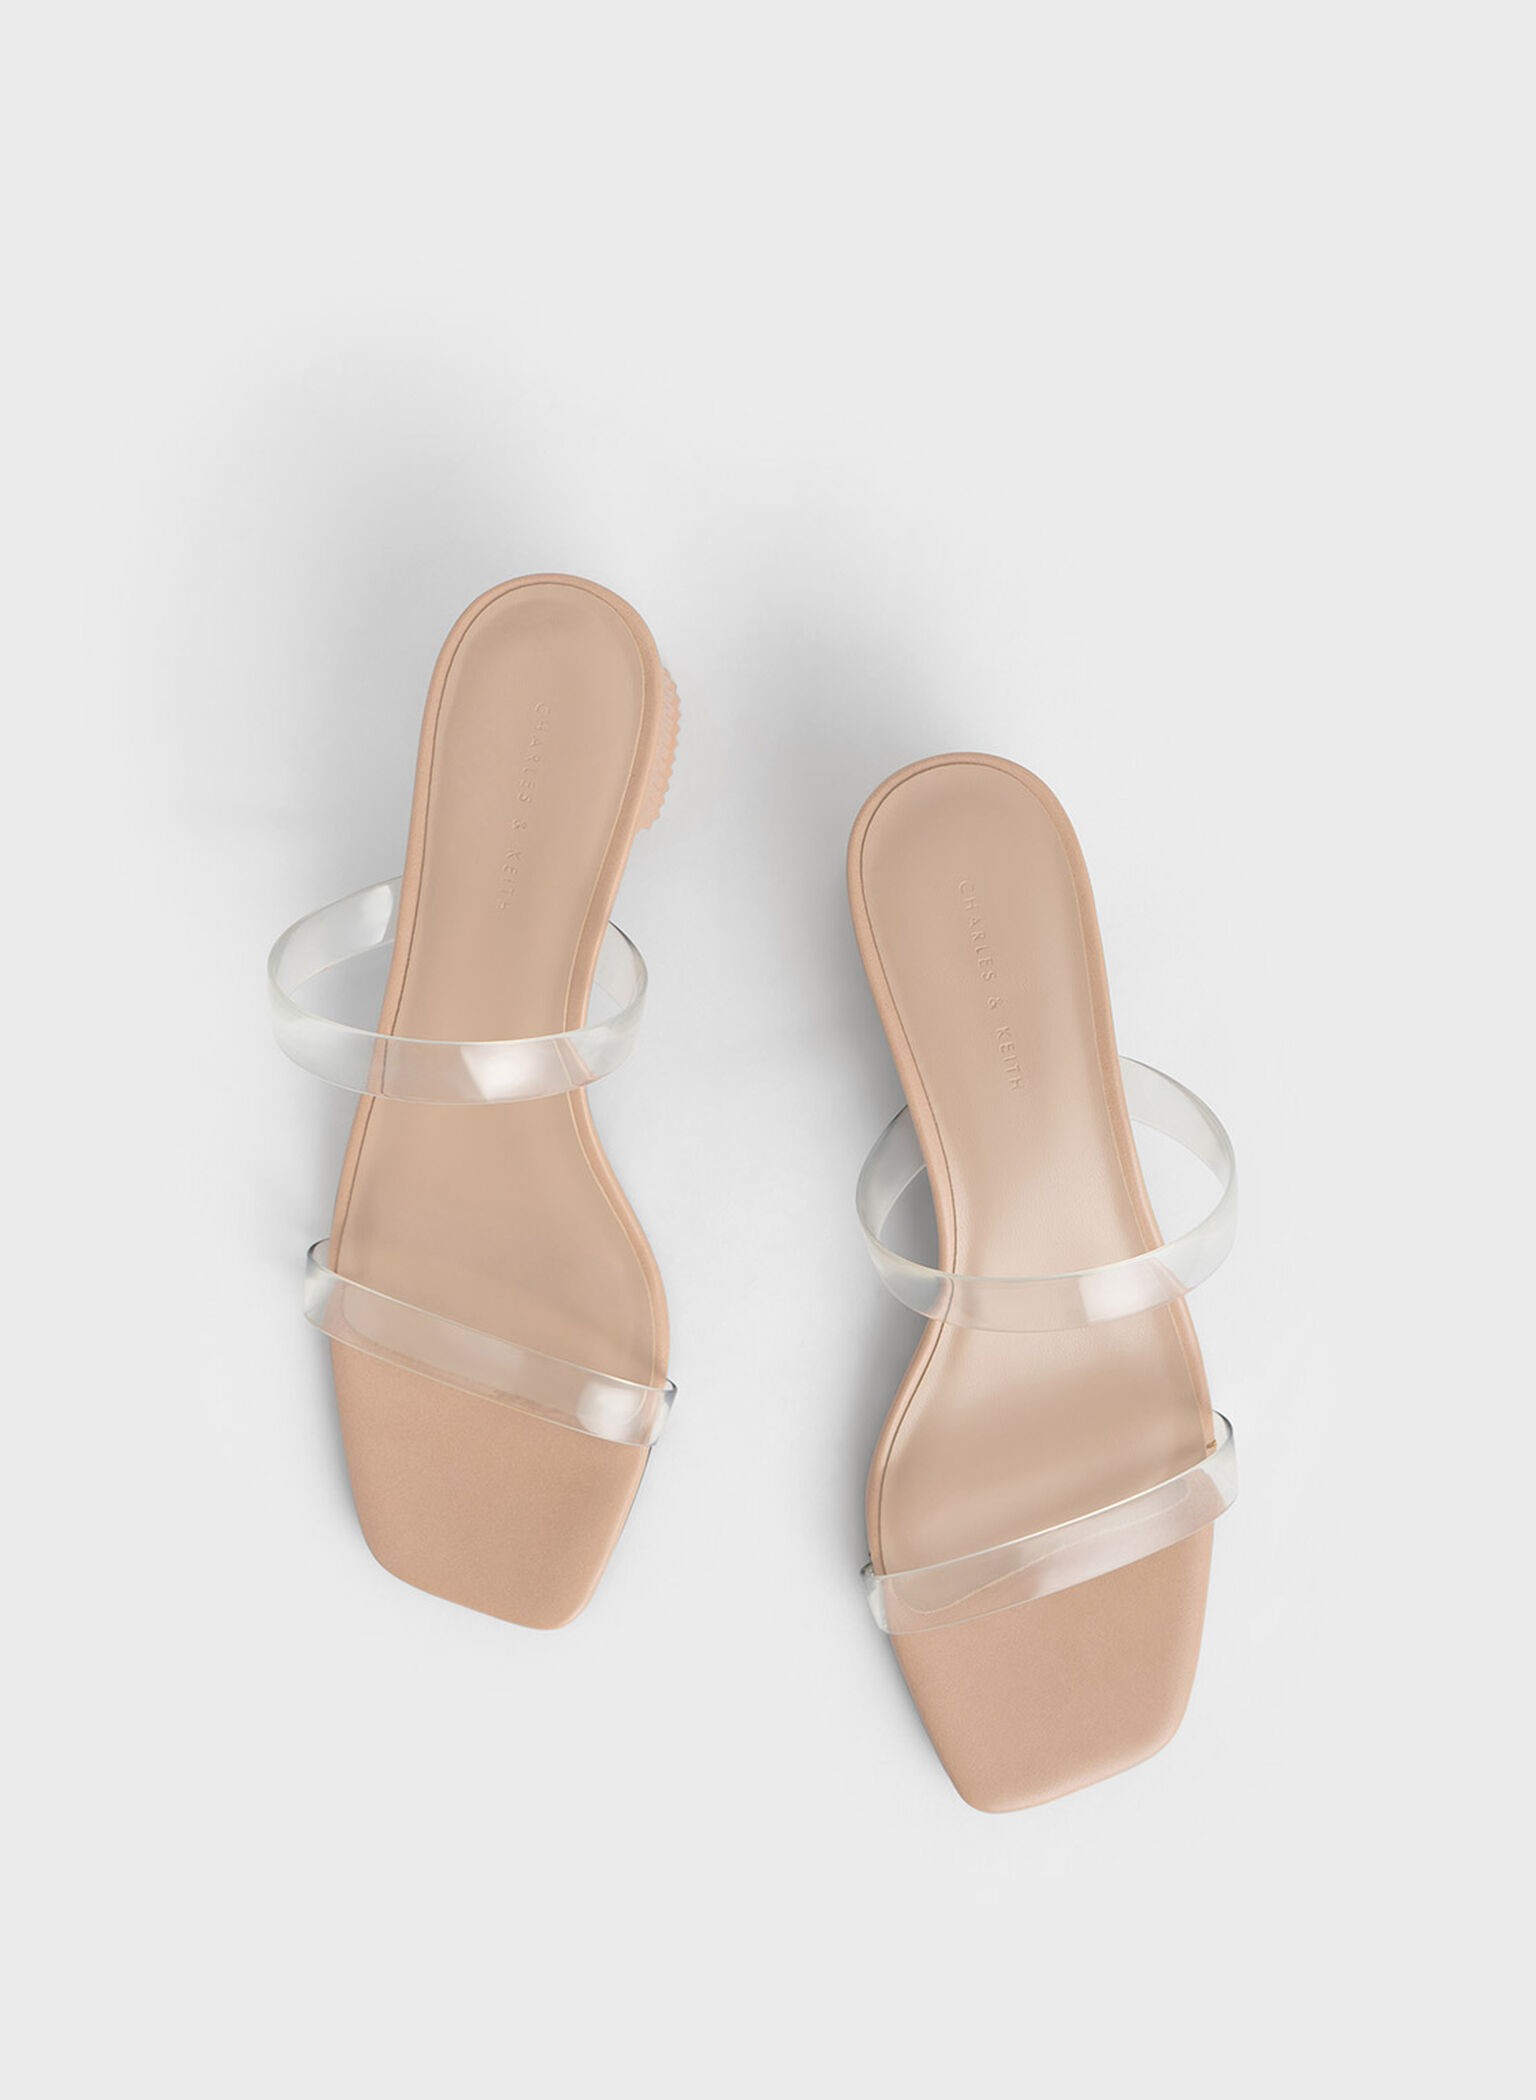 Double Strap See-Through Mules, Nude, hi-res